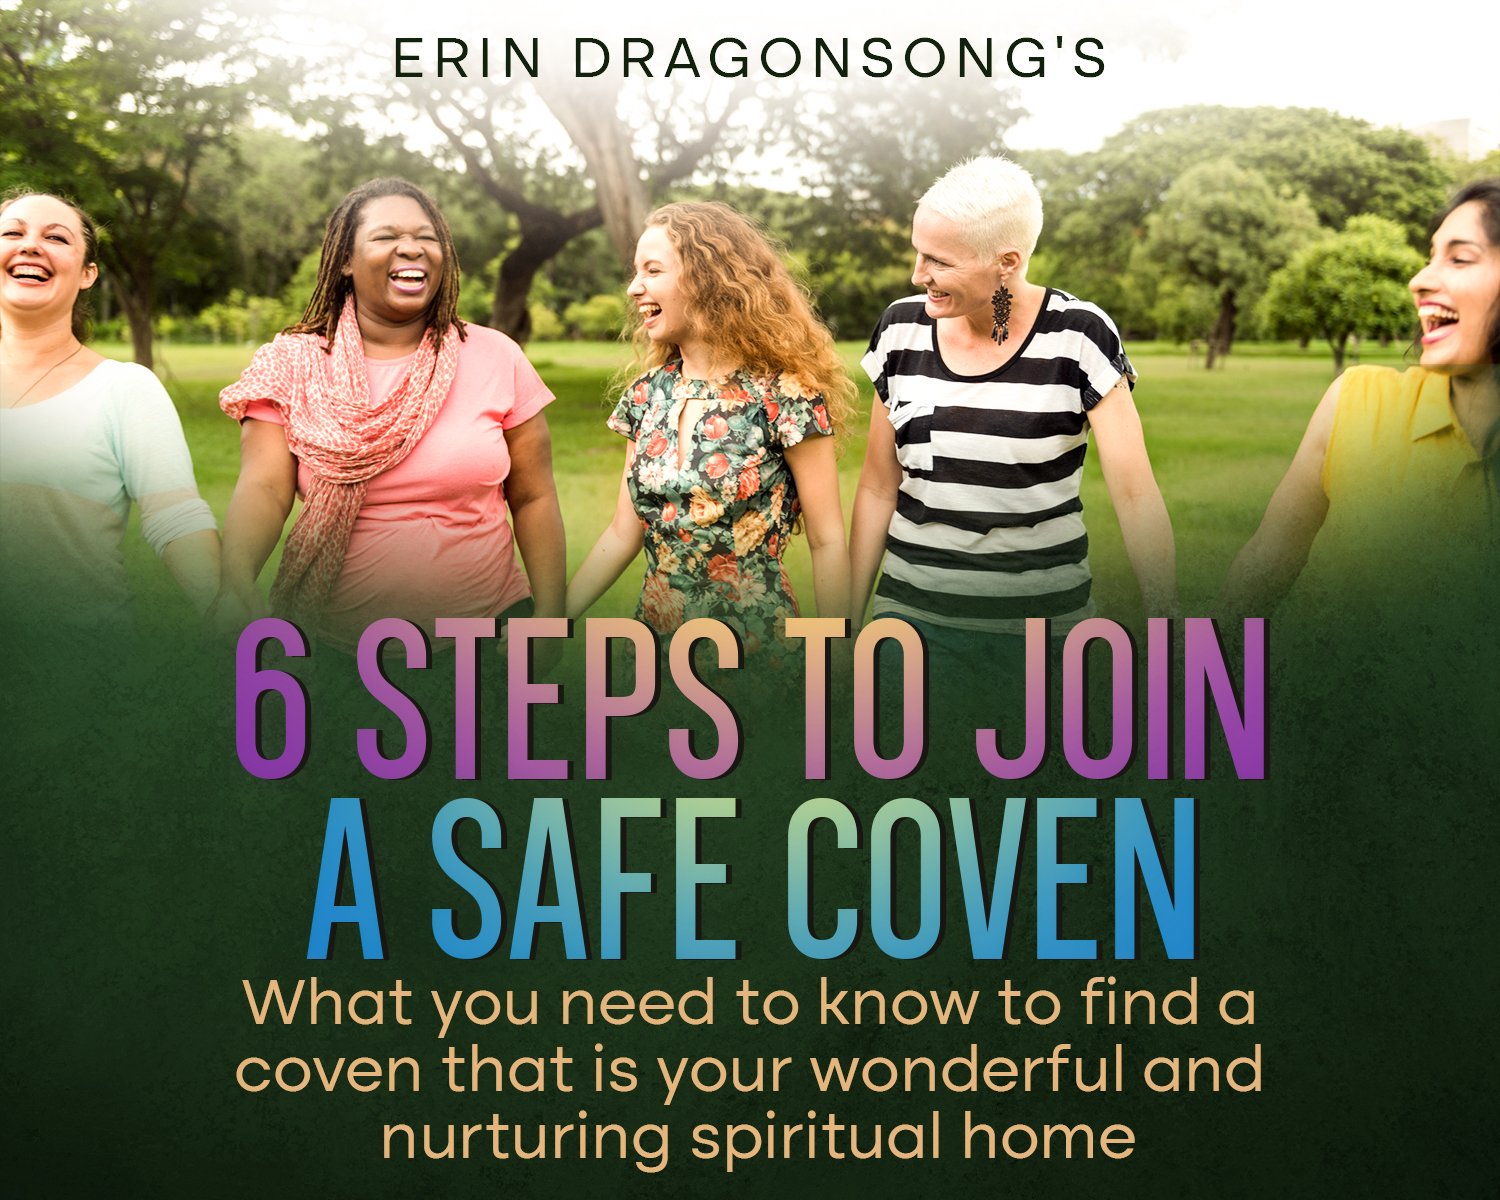 6 Steps to Join a Safe Coven ebook - 2nd edition (cover)